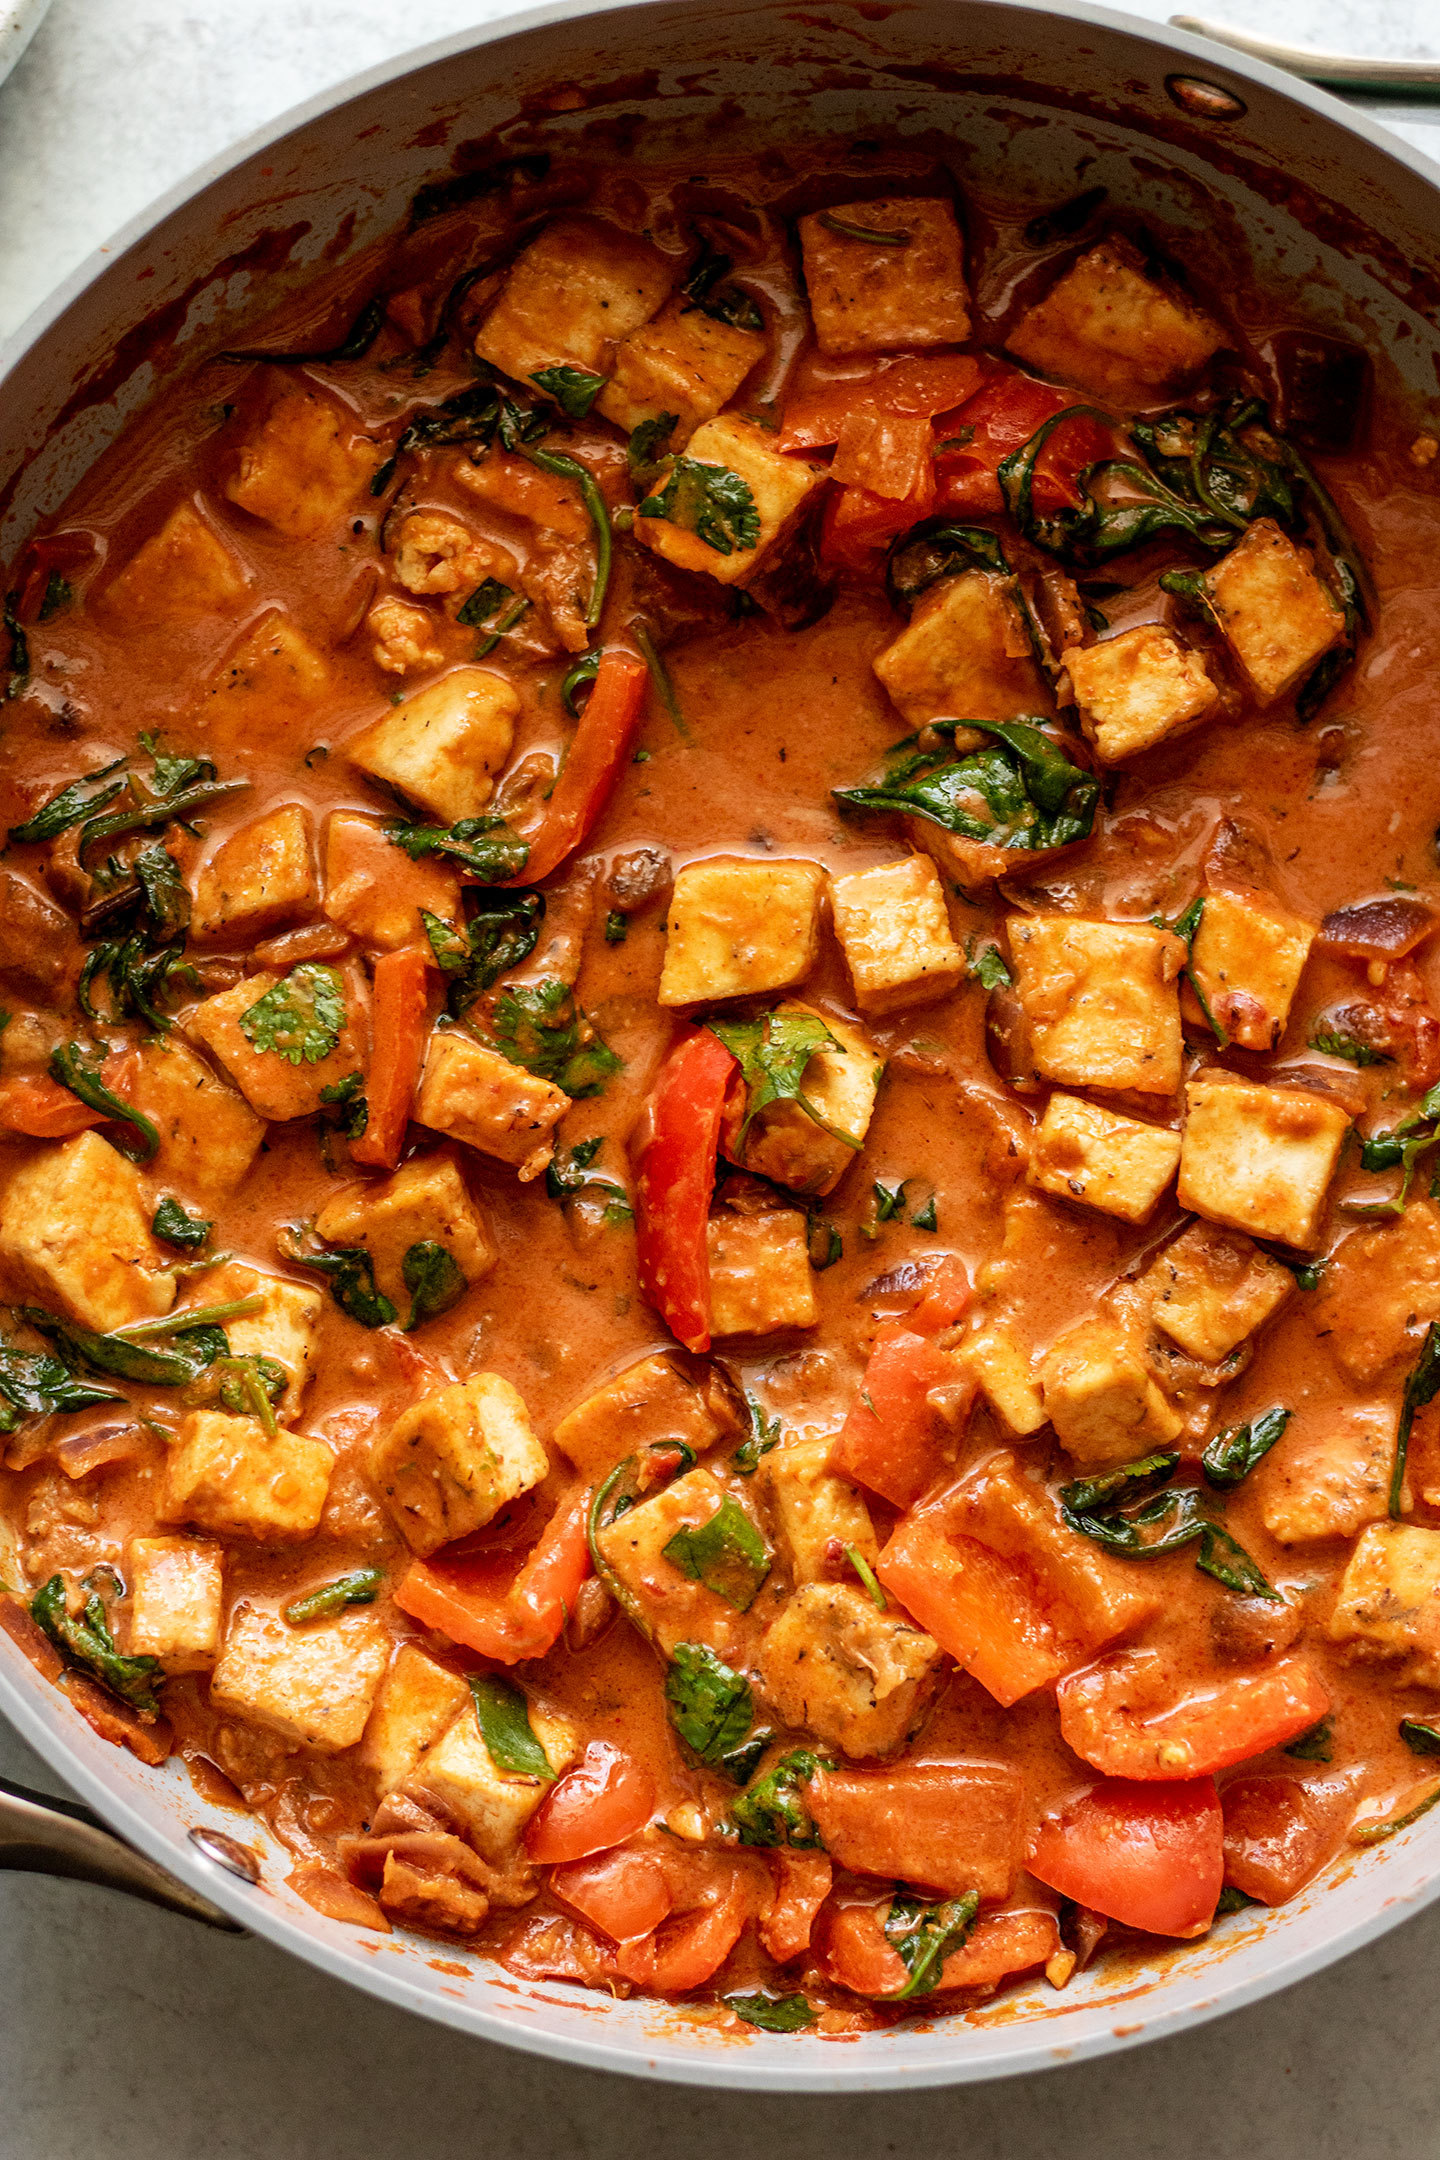 Tofu coated in the creamy peanut butter curry sauce.